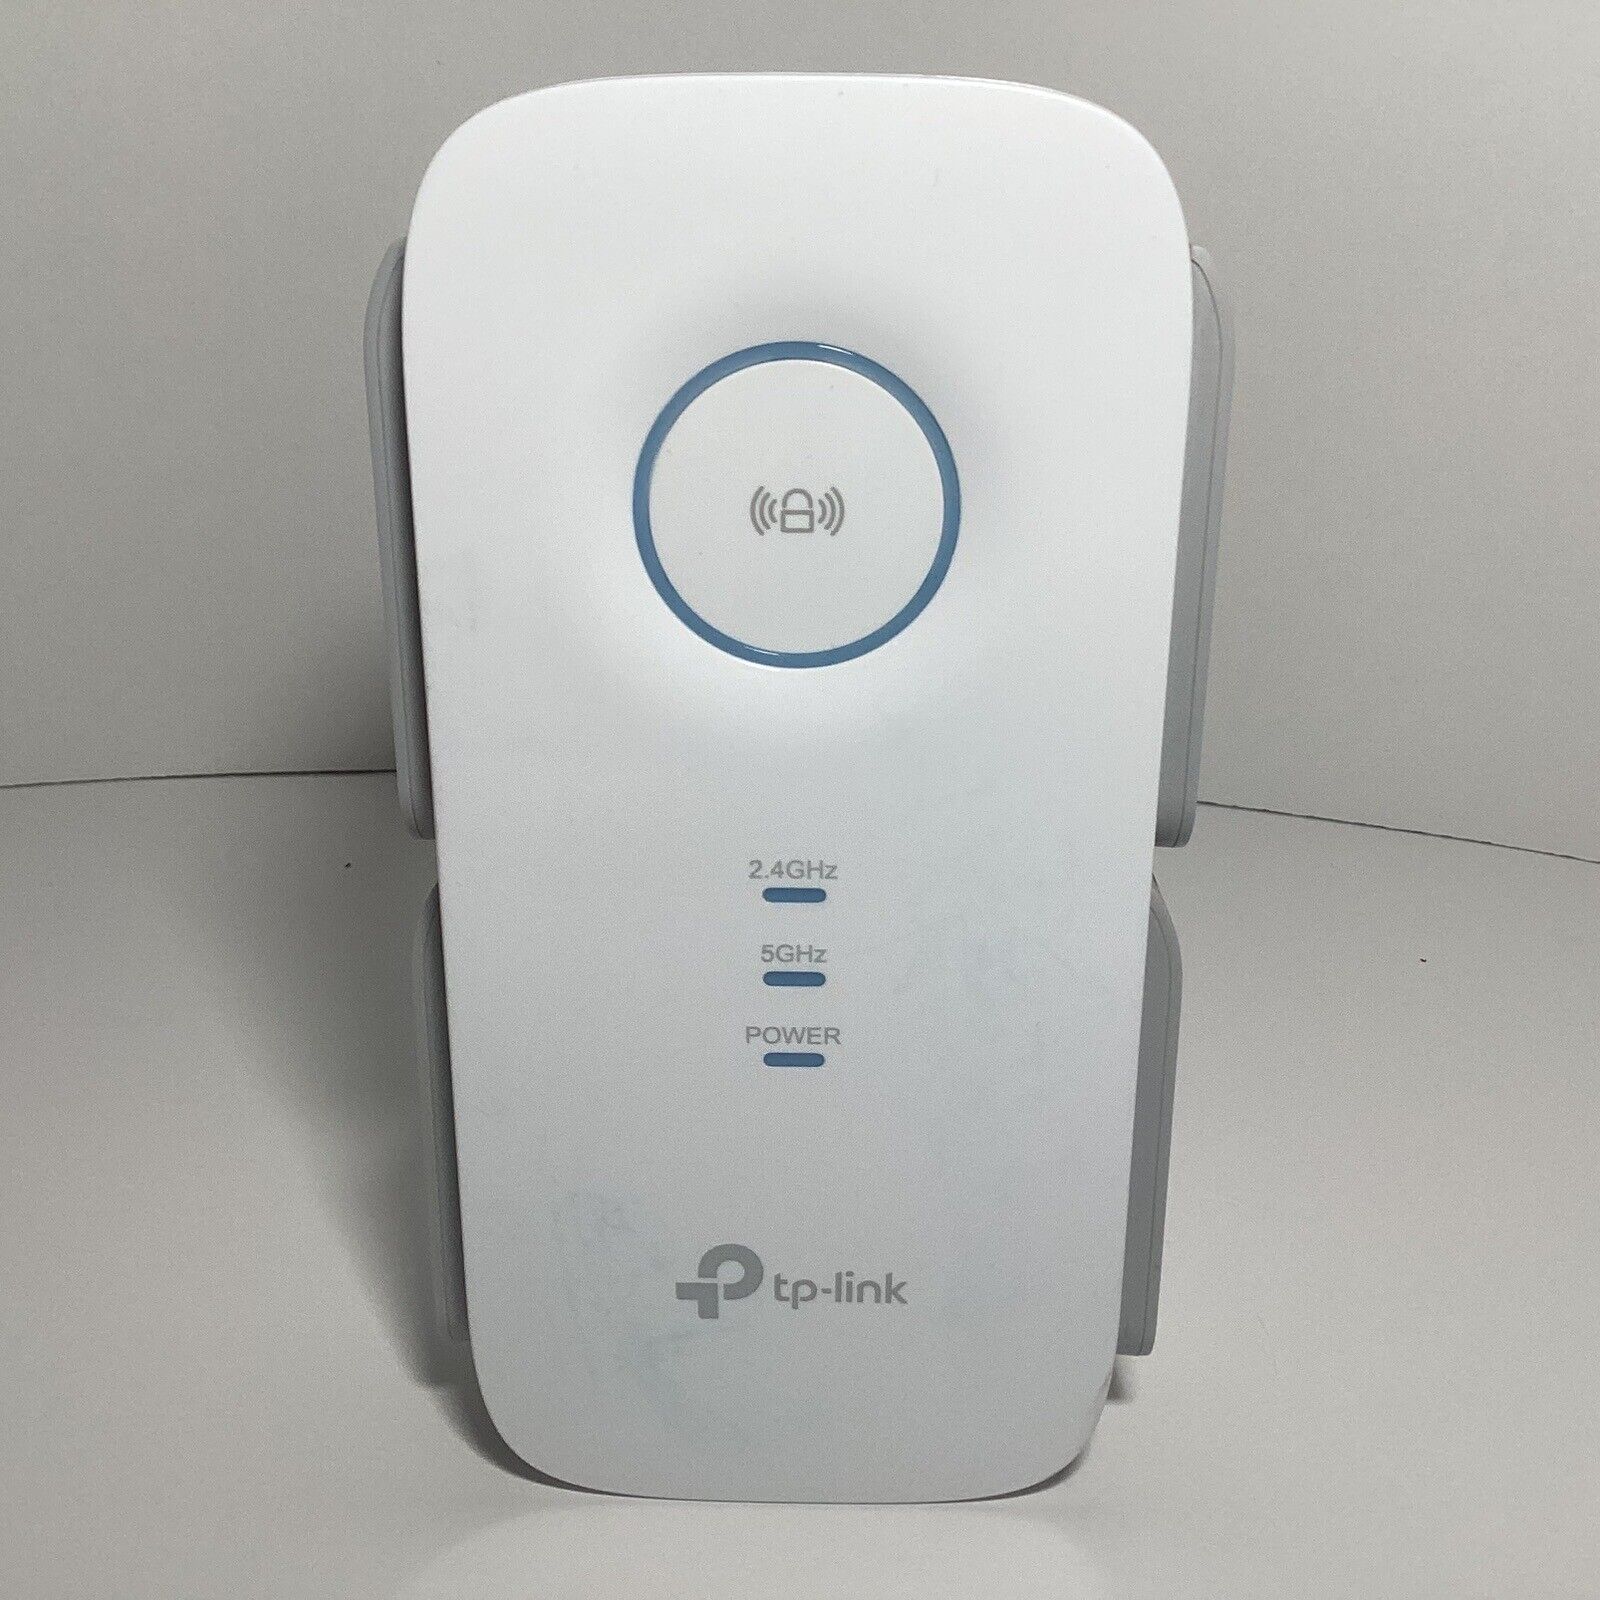 TP-Link RE650 AC2600 Wireless Dual Band MU-MIMO Wi-Fi Range Extender Tested Work